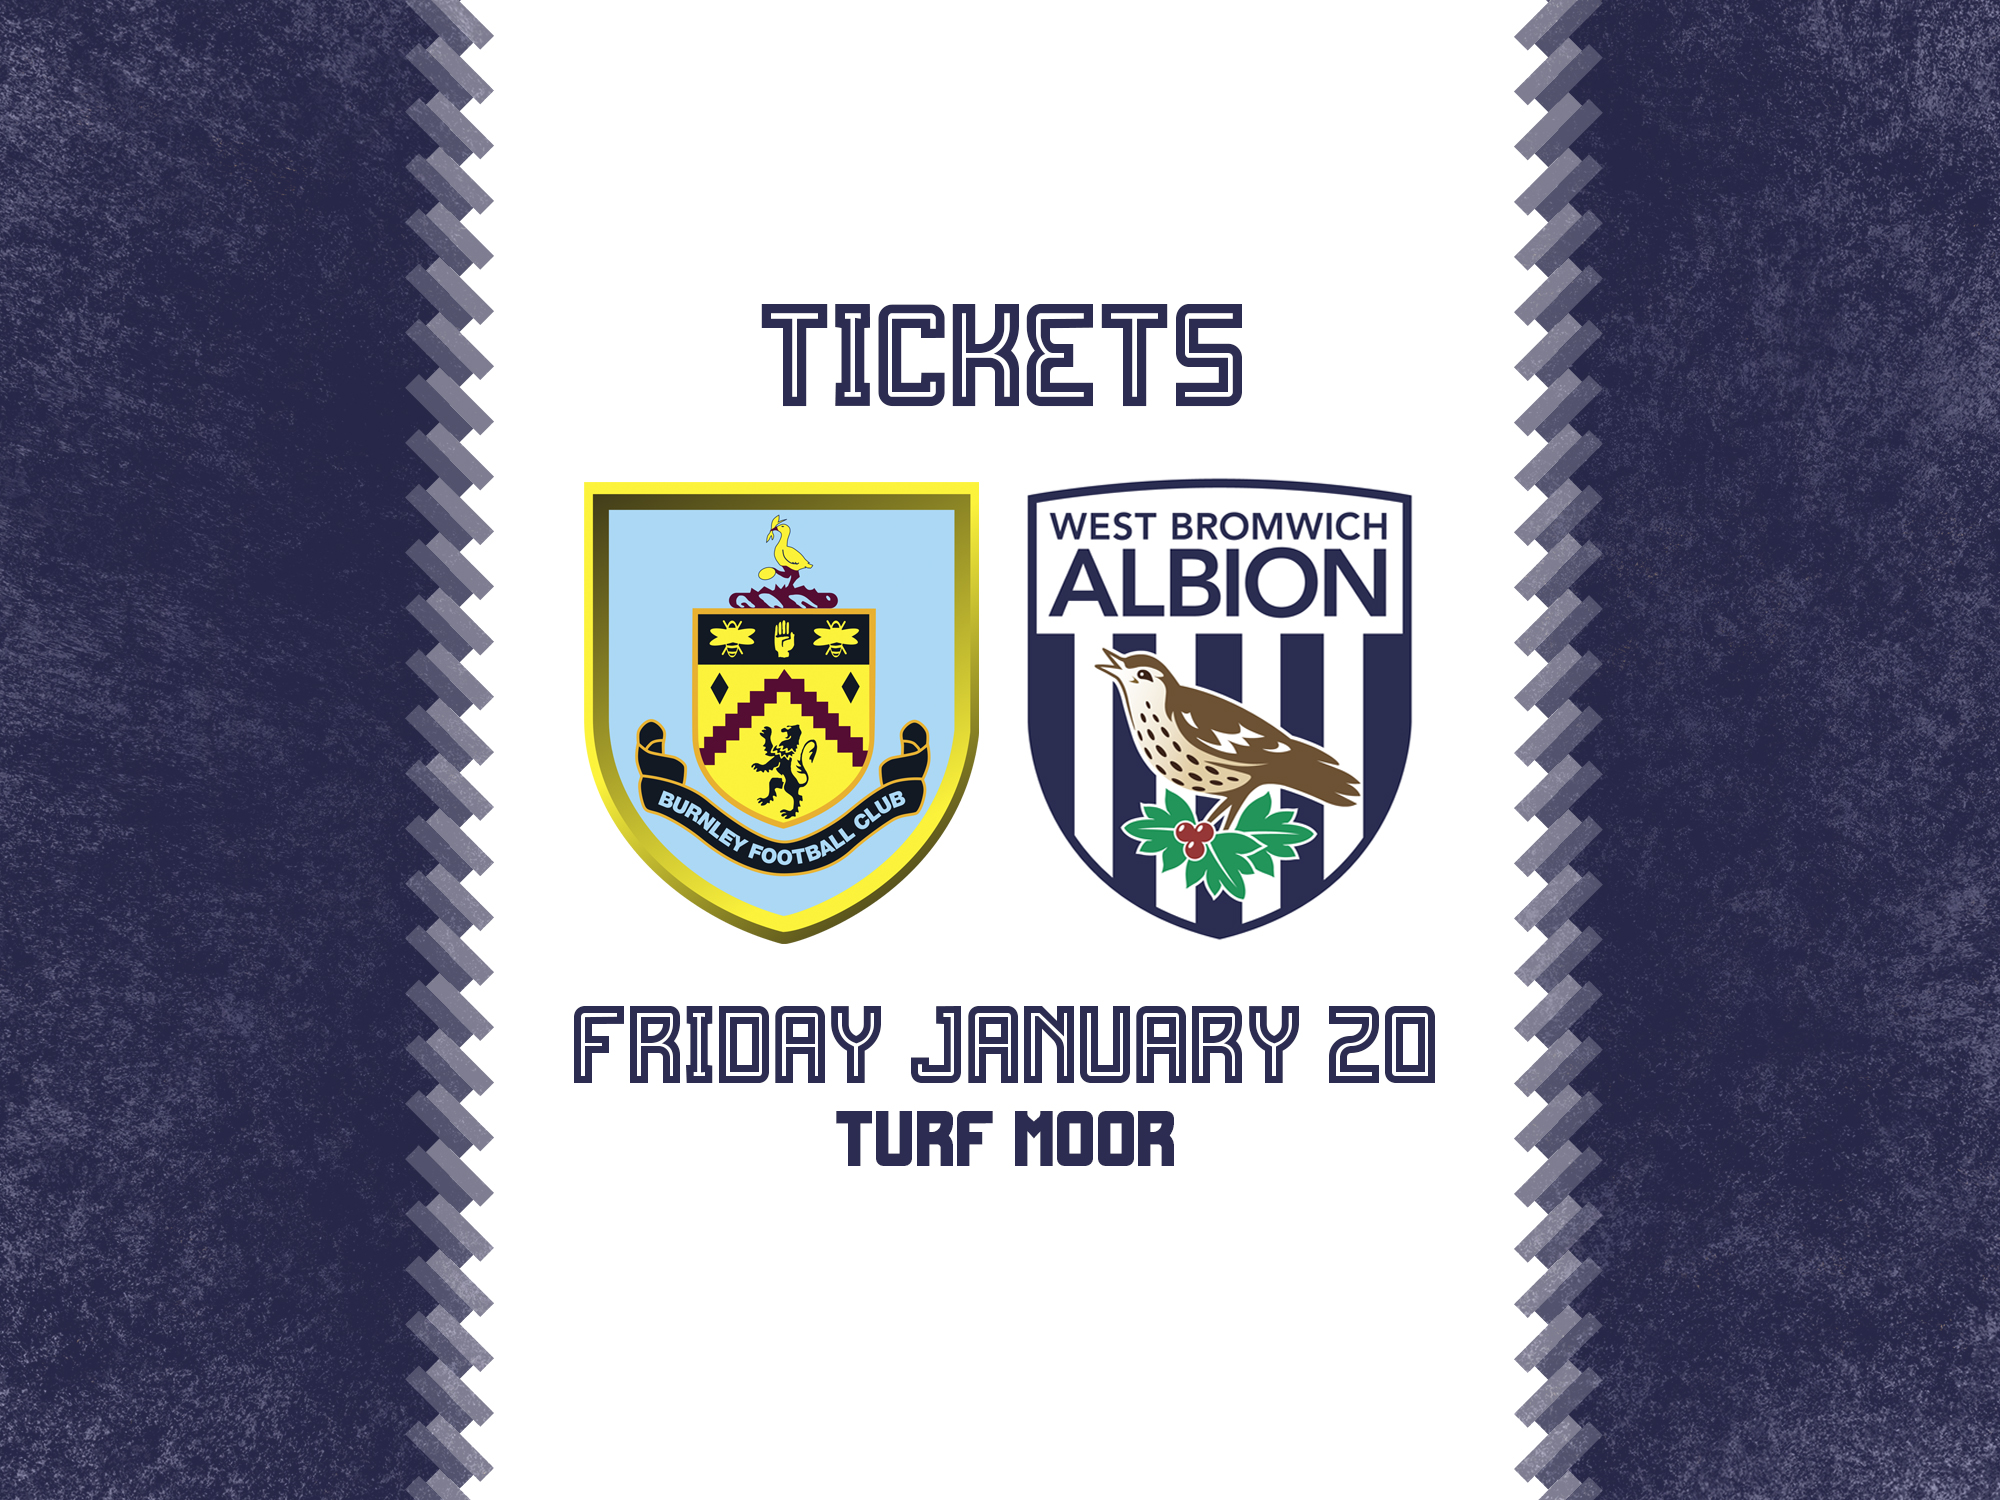 A ticket graphic for Albion's trip to Burnley